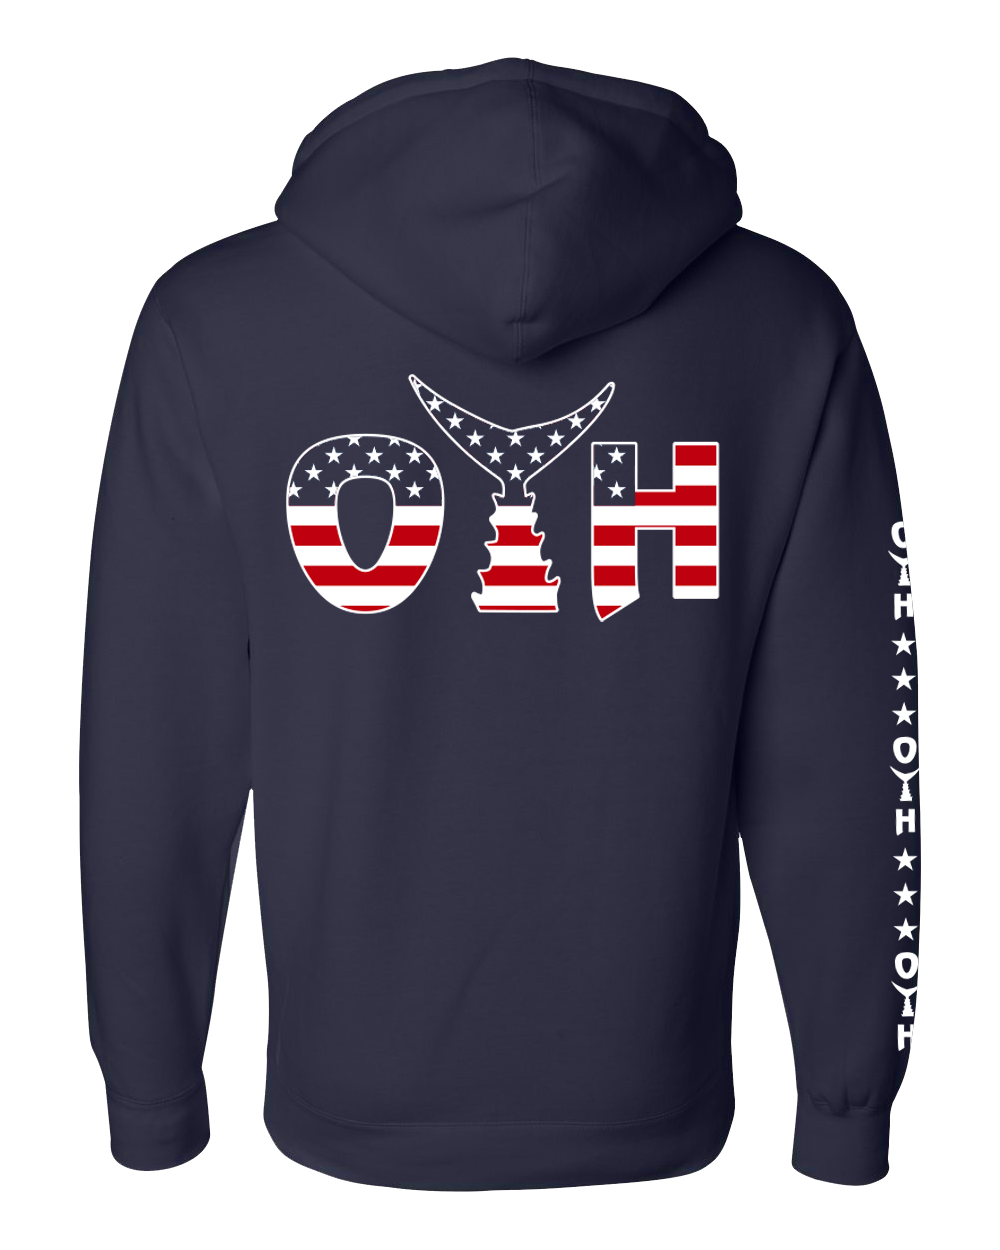 Freedom O.T.H. Navy Hoodie